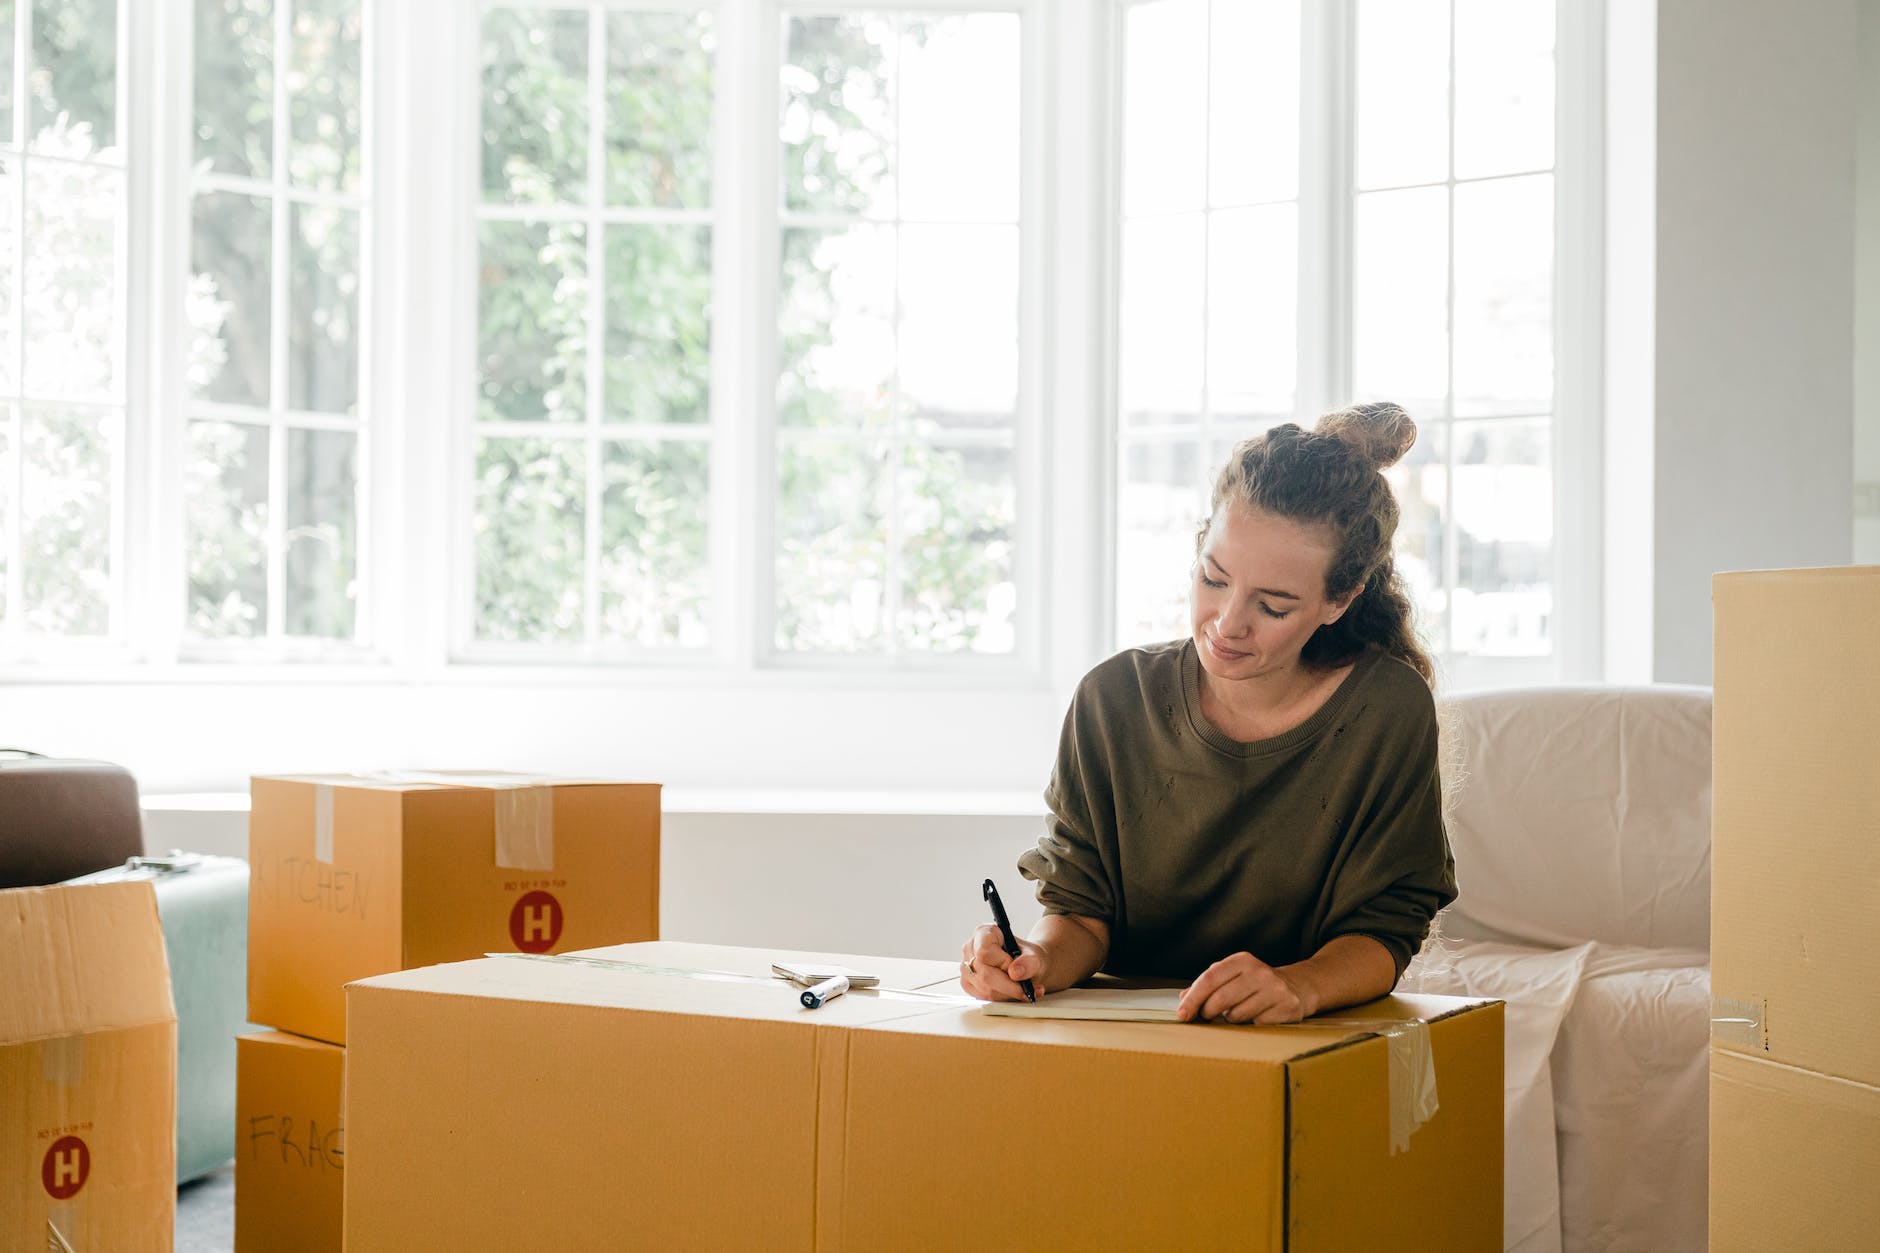 10 Key Factors to Consider When Choosing a Moving Date